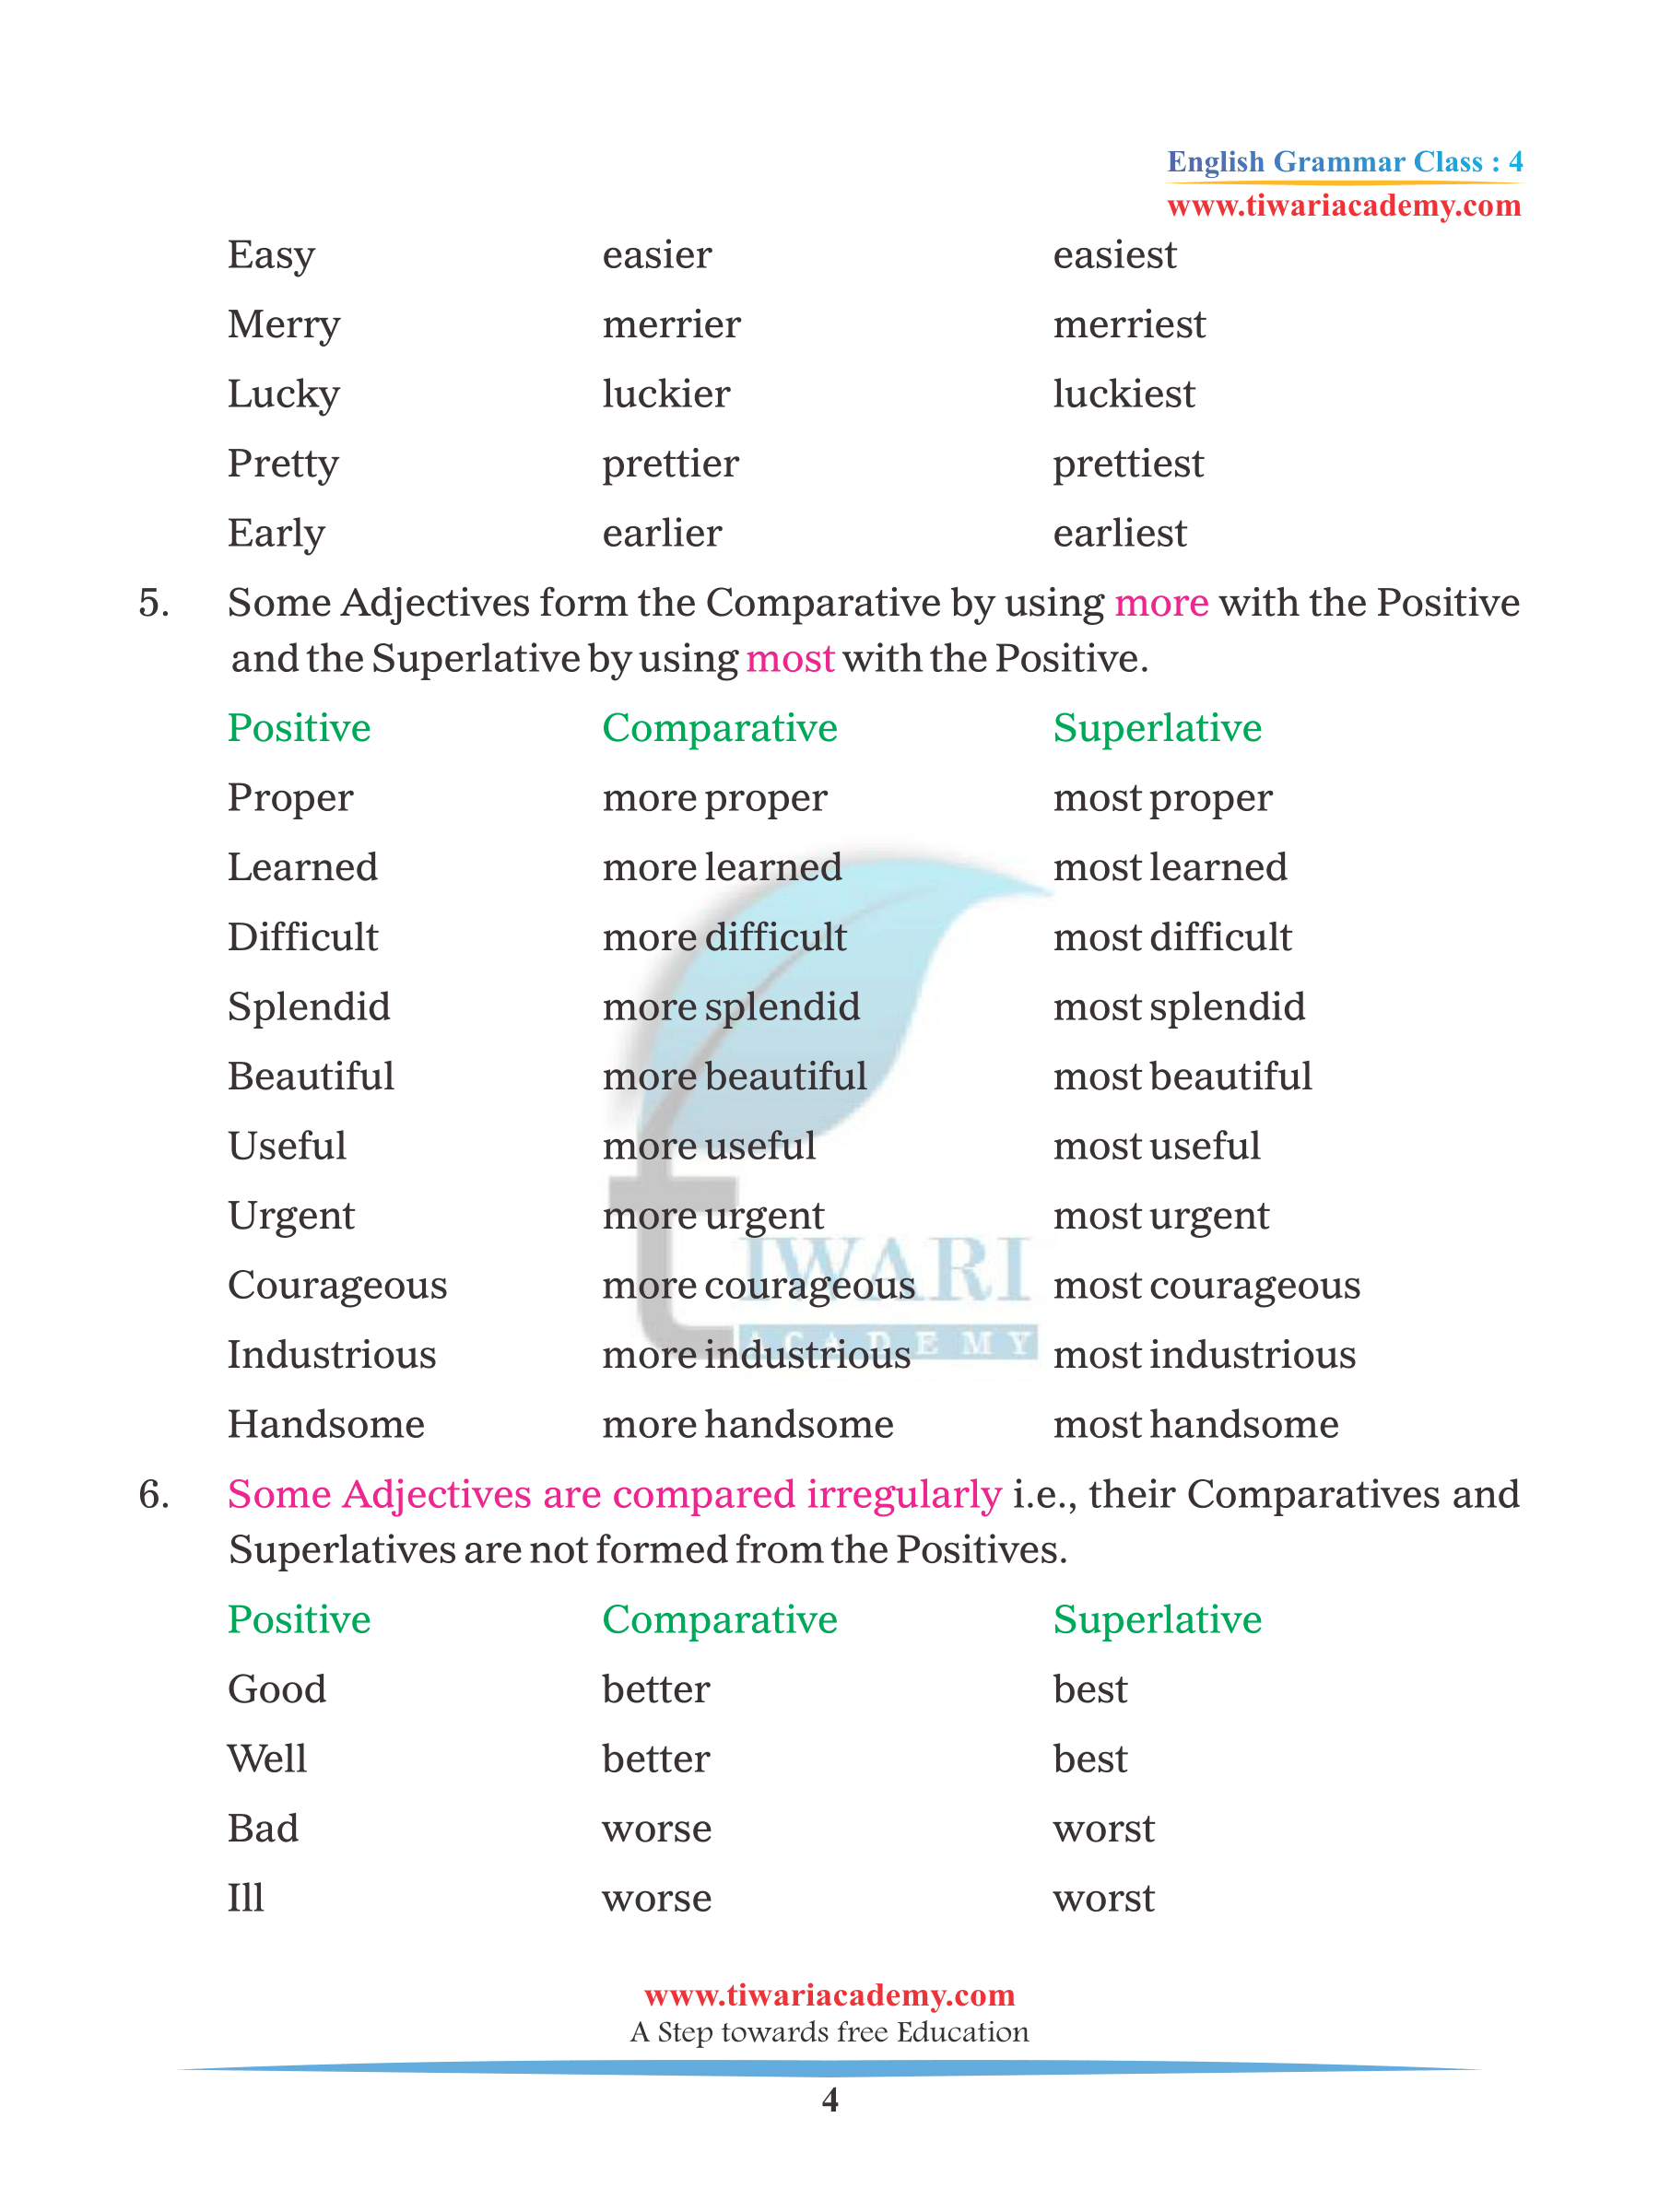 Class 4 English Grammar Chapter 10 Adjective their comparison in PDF